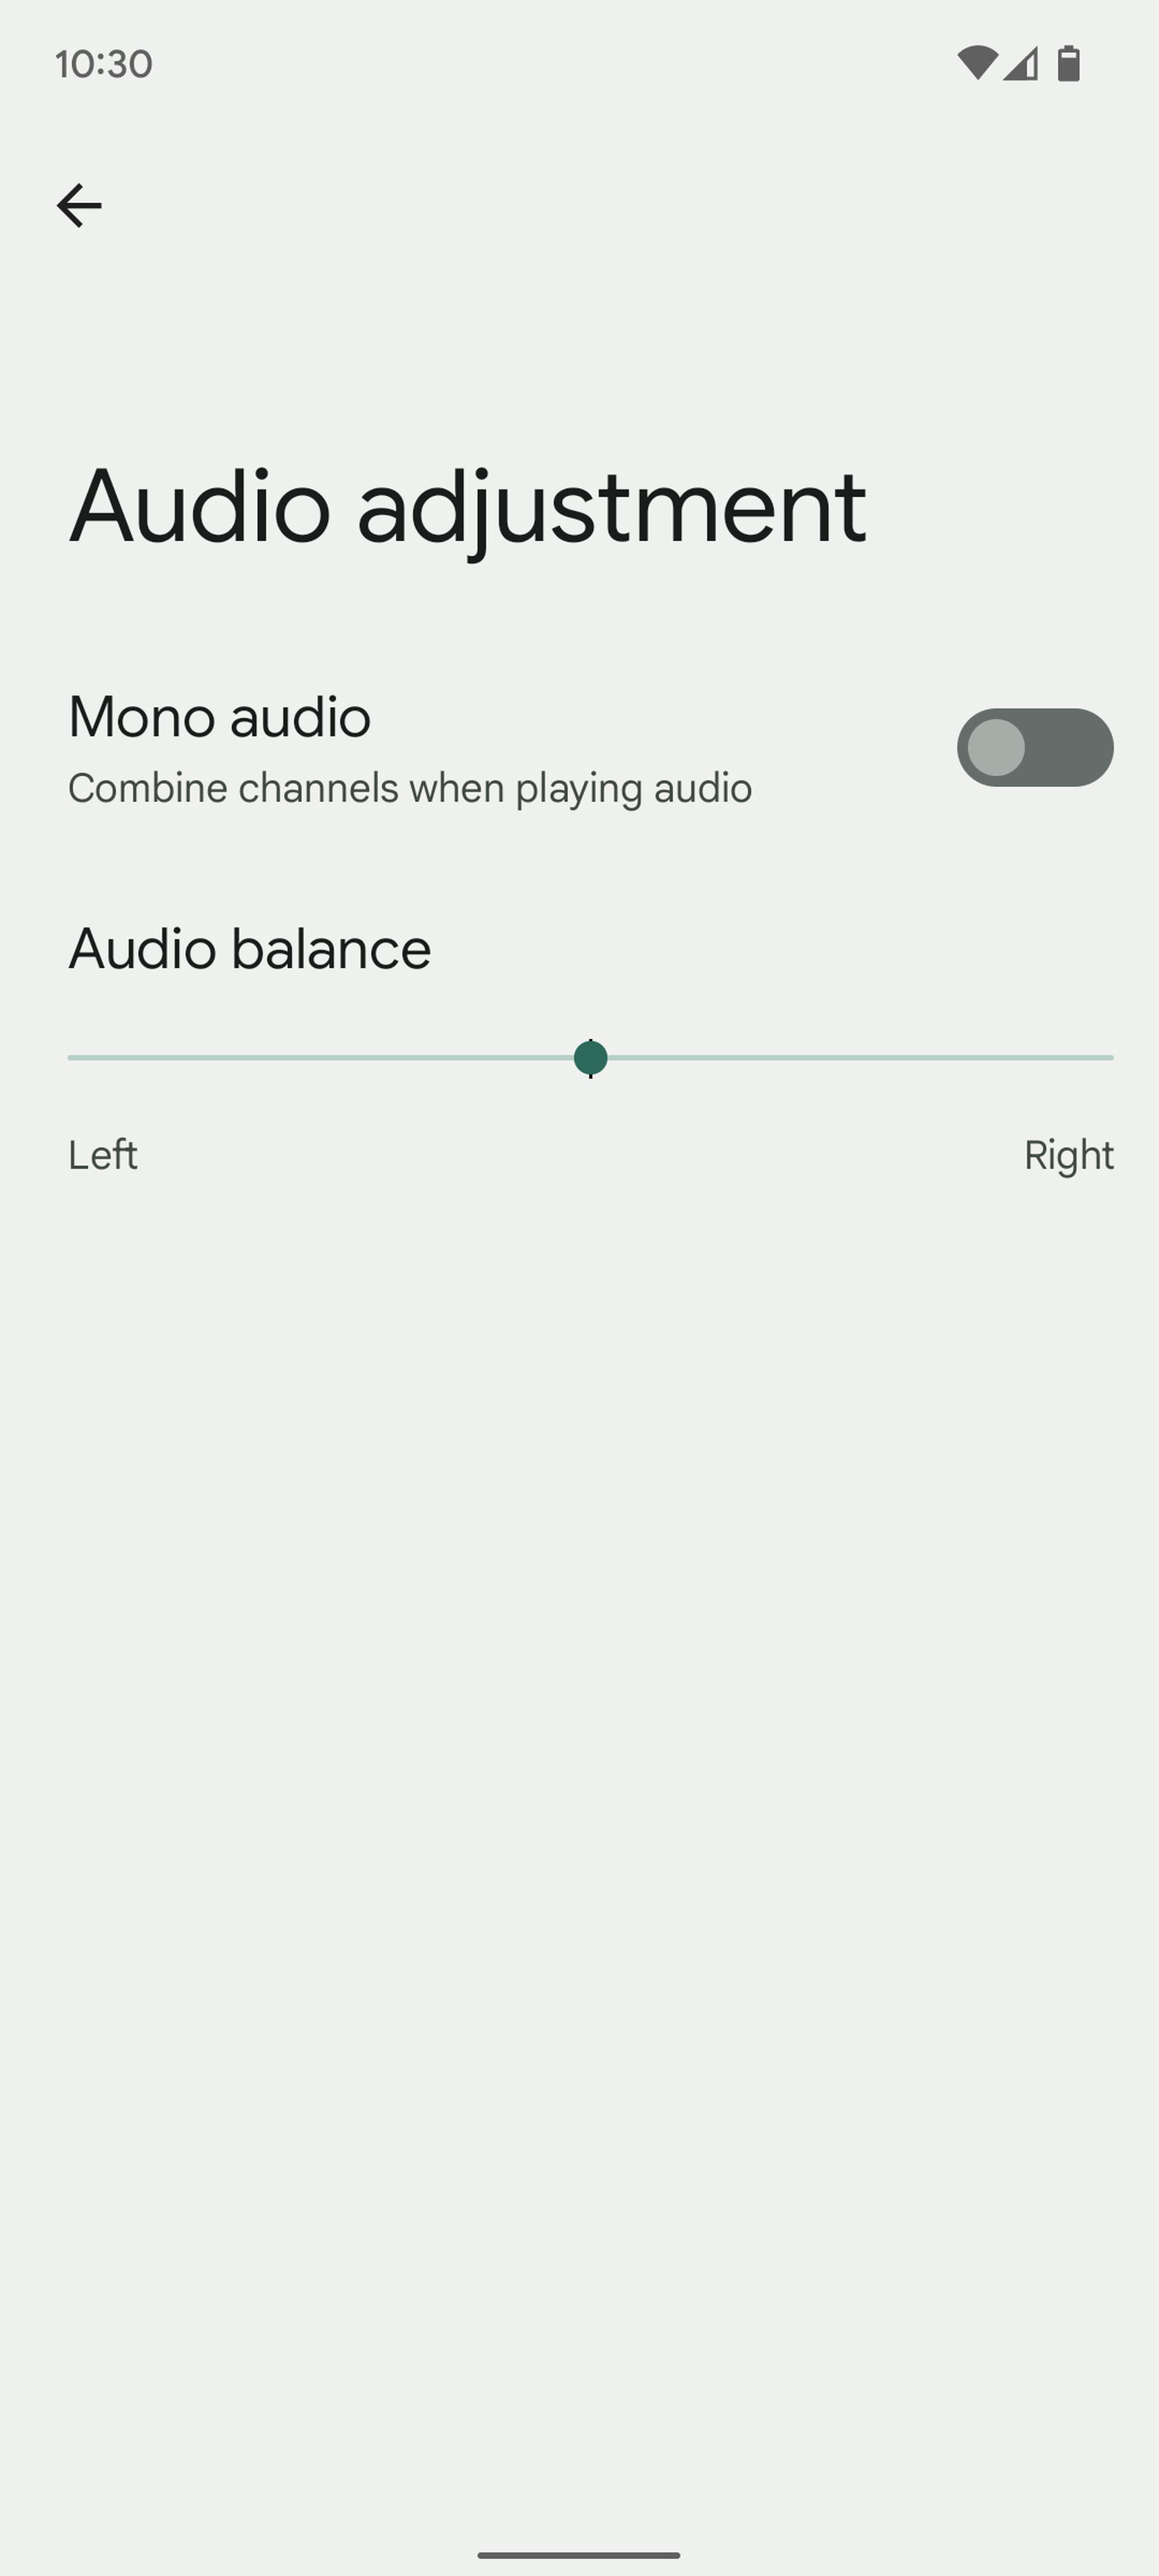 Audio adjustment page with controls